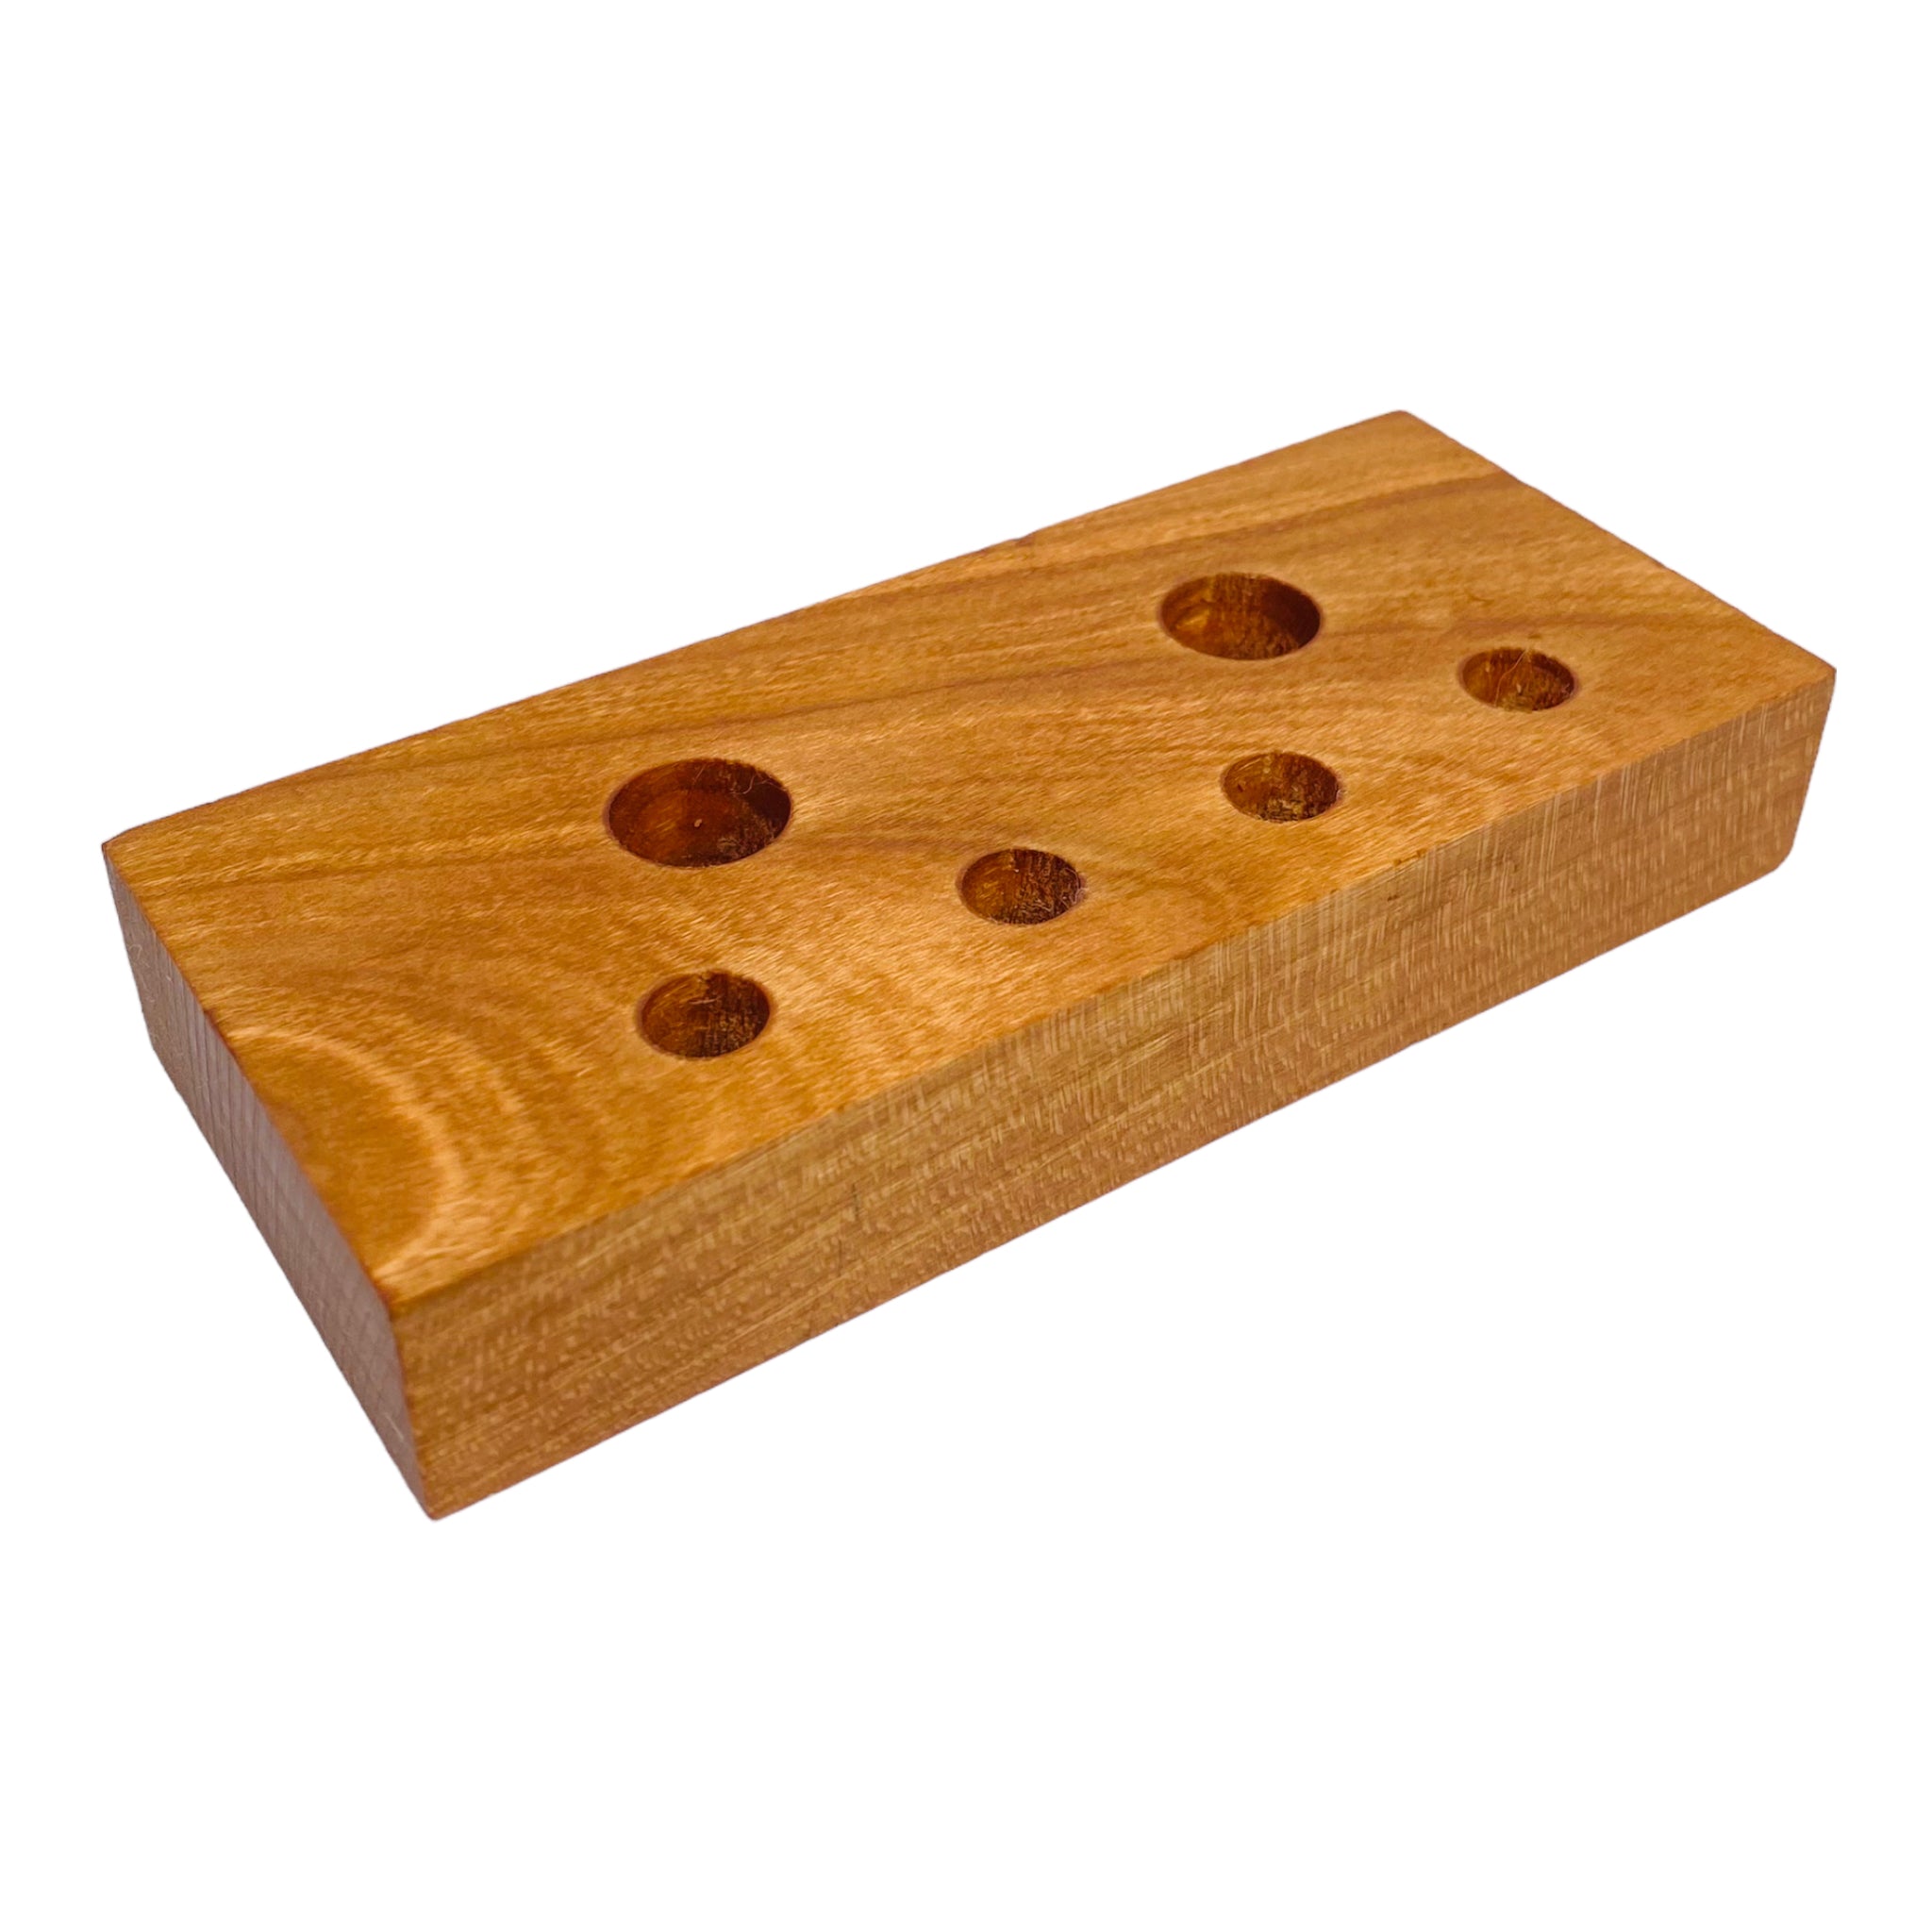 6 Hole Wood Display Stand Holder For 14mm And 10mm Bong Bowl Pieces Or Quartz Bangers